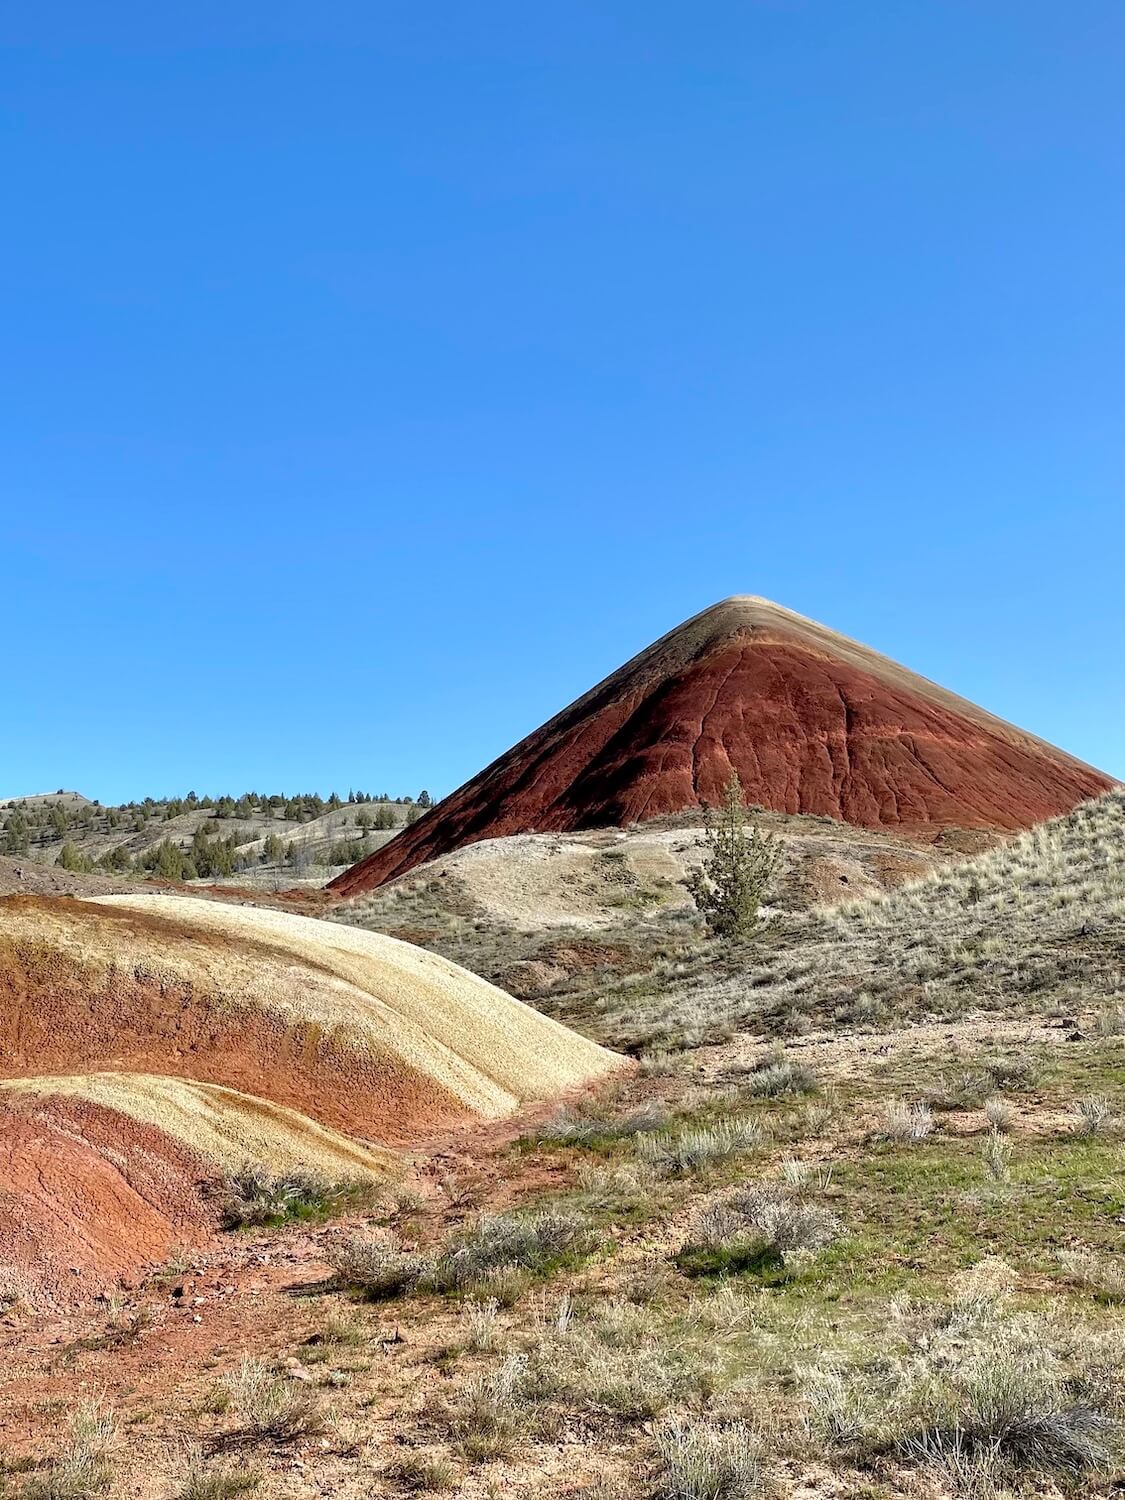 The striking red mound at the Red Scar Knoll hiking trail beckons a closer look while the blue sky makes the color really pop.  The green grasses in the foreground add additional elements of interest to the photo.